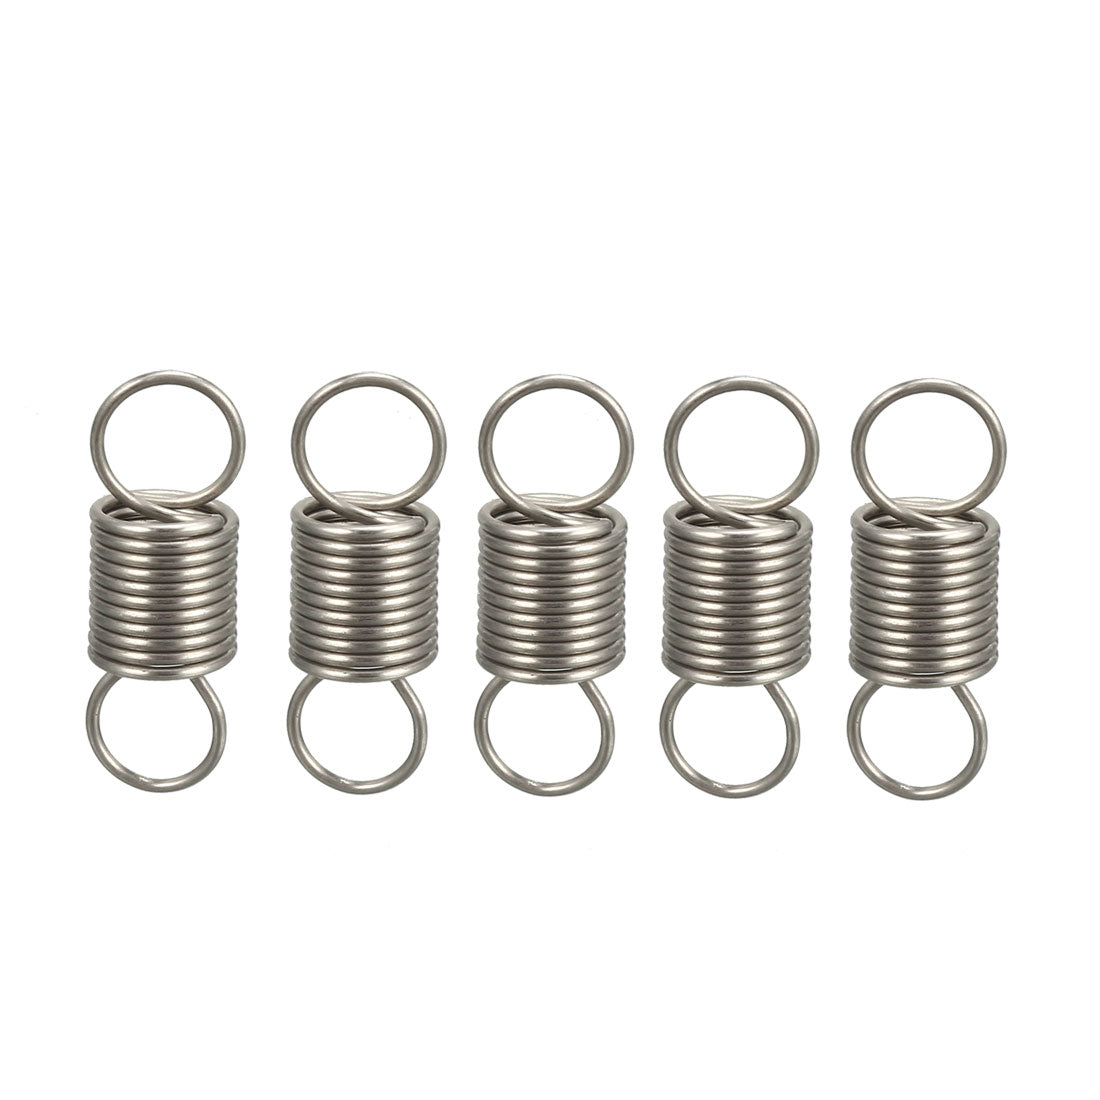 uxcell Uxcell Extended Tension Spring Wire Diameter 0.02", OD 0.2", Free Length 0.59" 5pcs